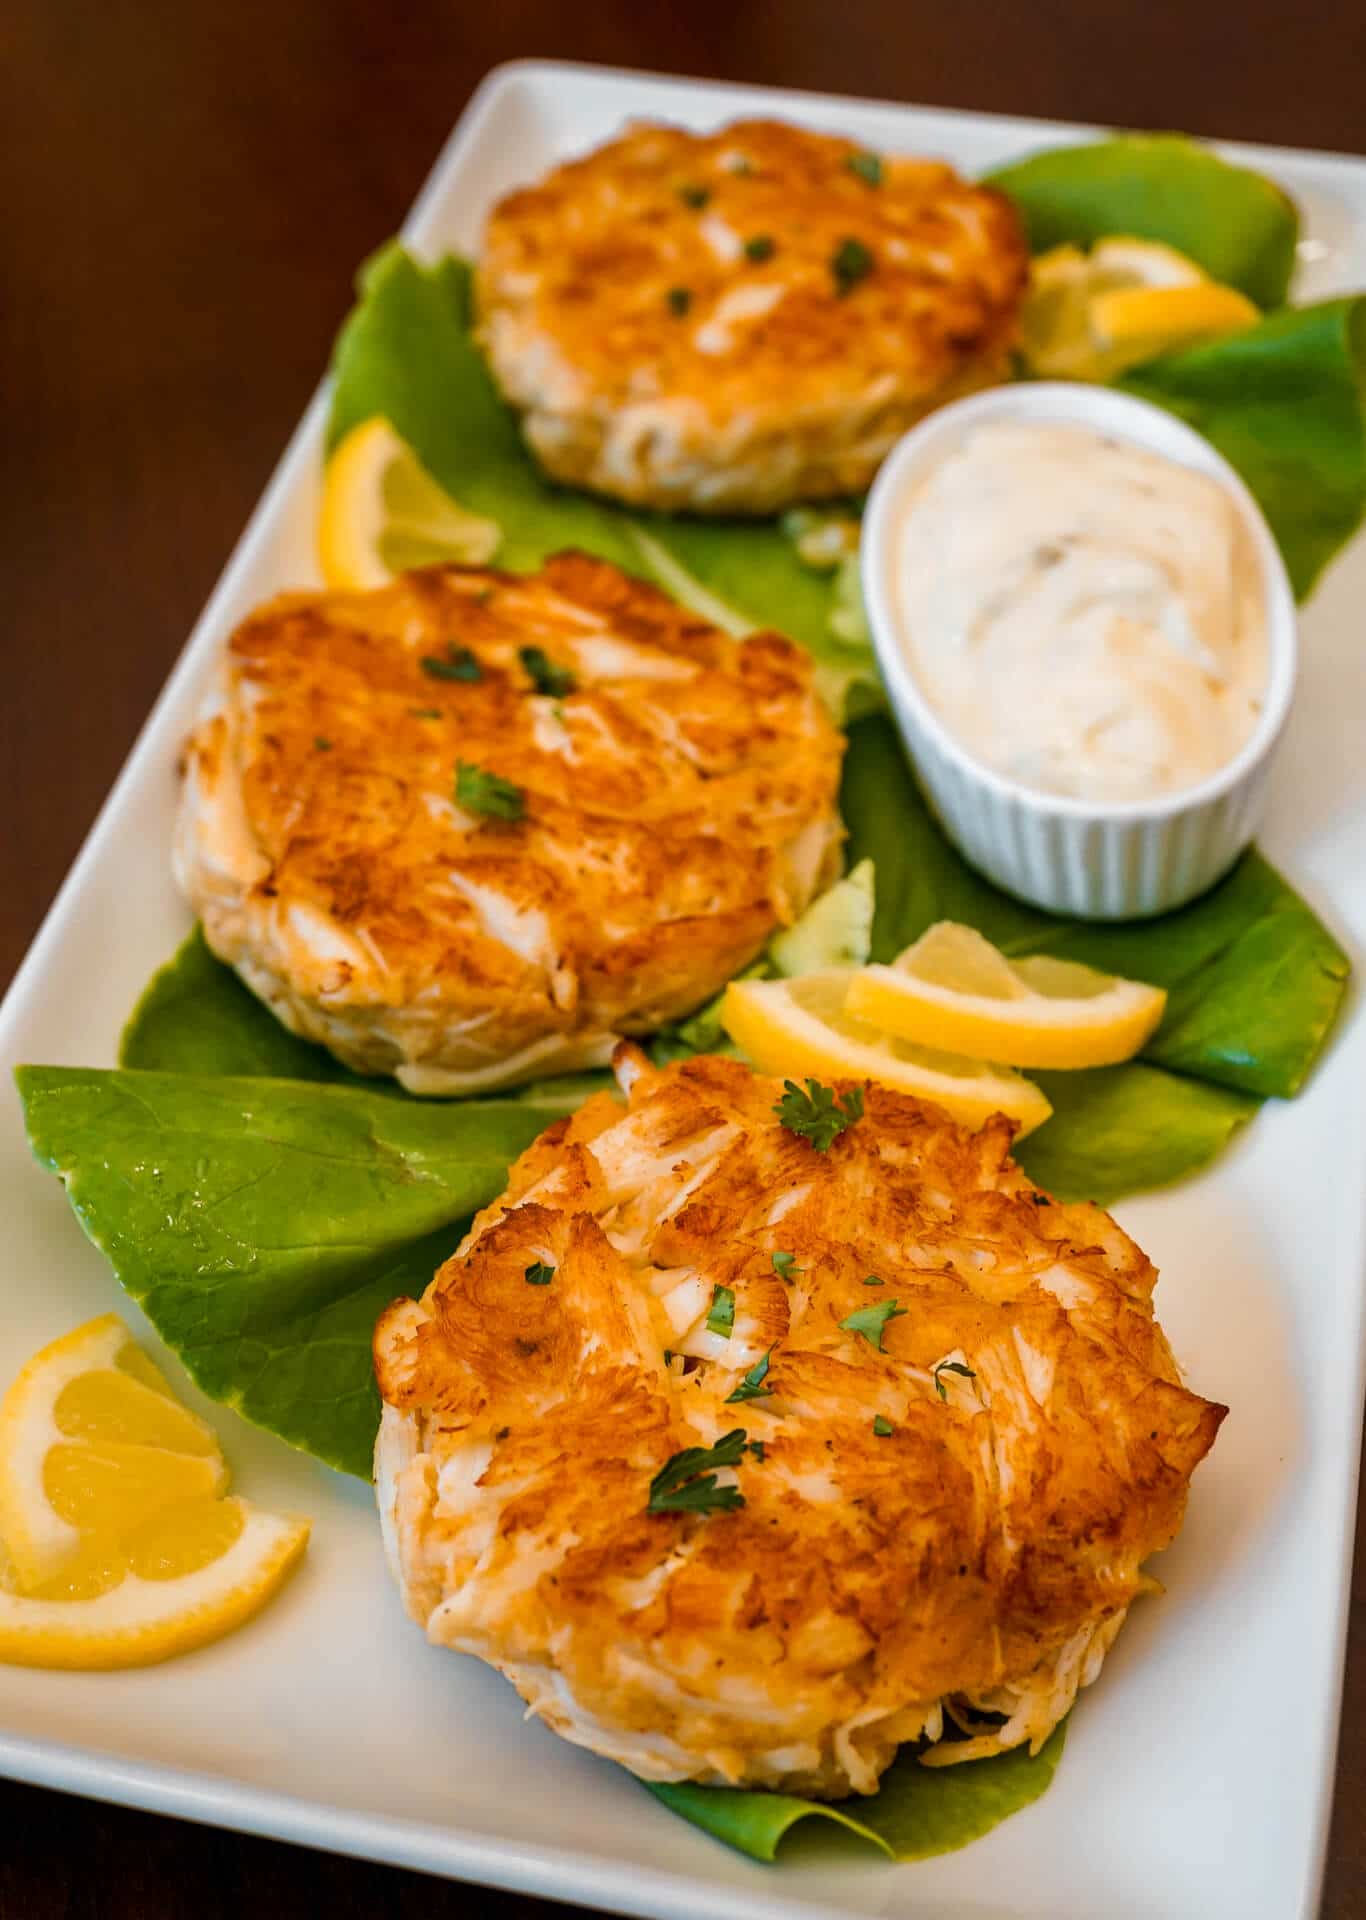 Ship Maryland Crabcakes to Delaware | Order Online, Fast Shipping!